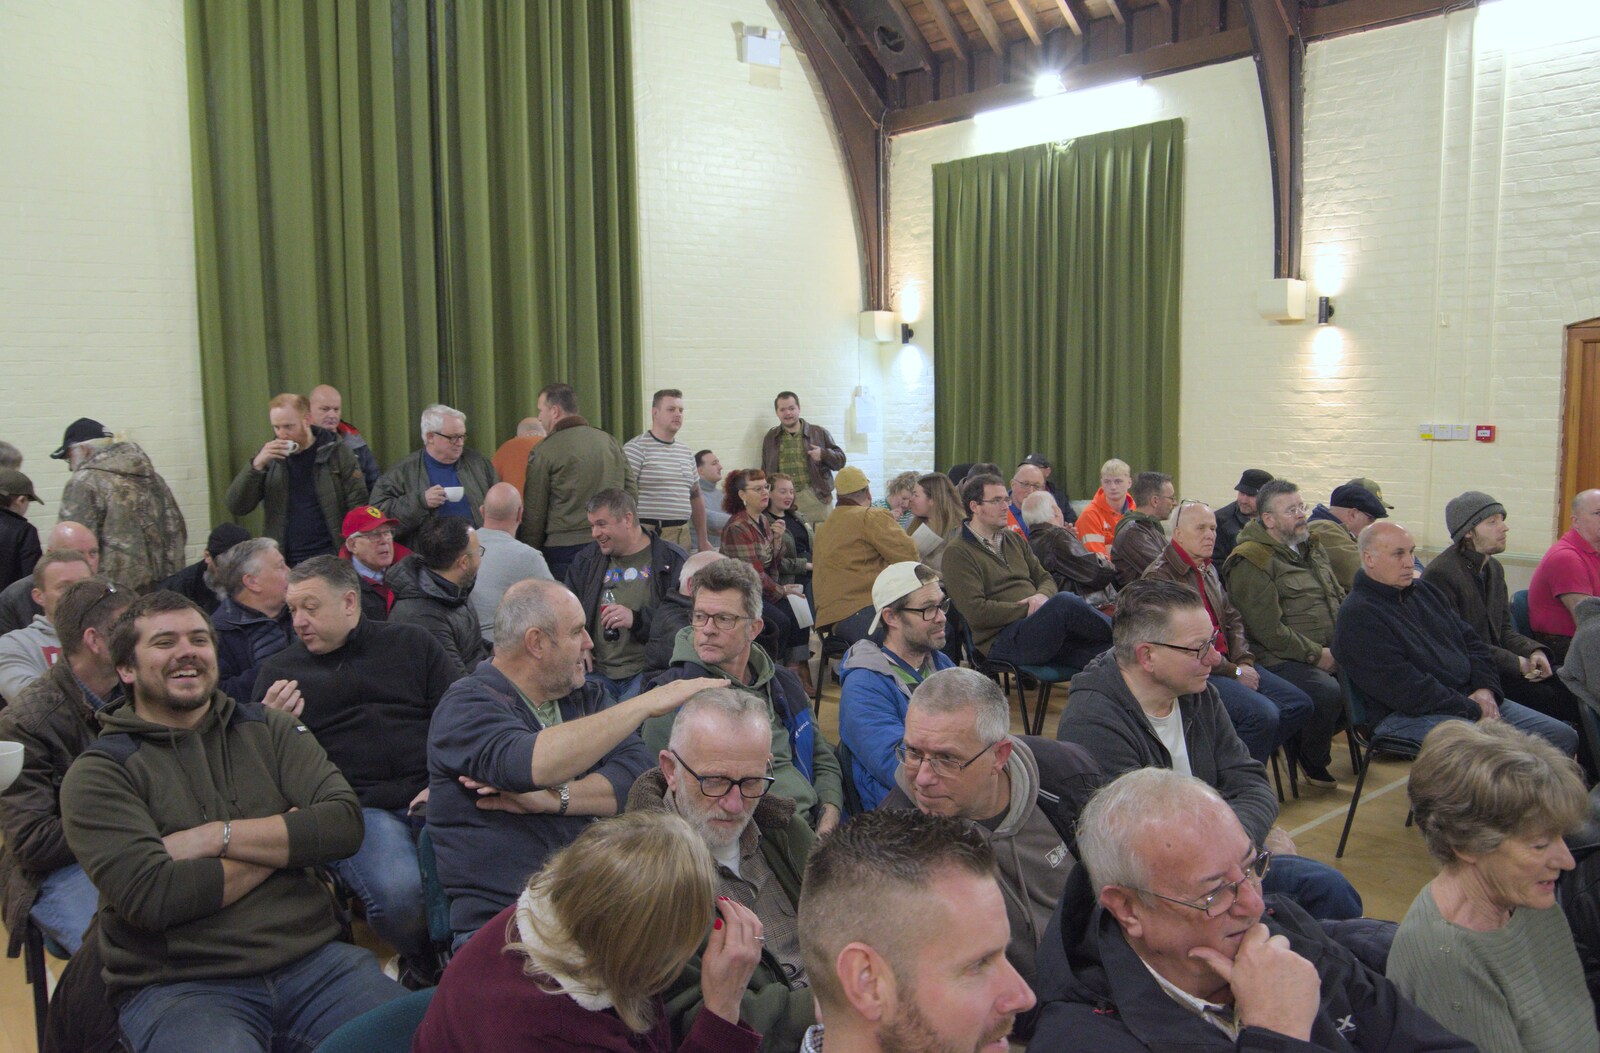 St. Edmund's Hall in Hoxne is packed from Framlingham, Aldeburgh and the USAAF Heritage Trust, Hoxne, Suffolk - 14th February 2024 